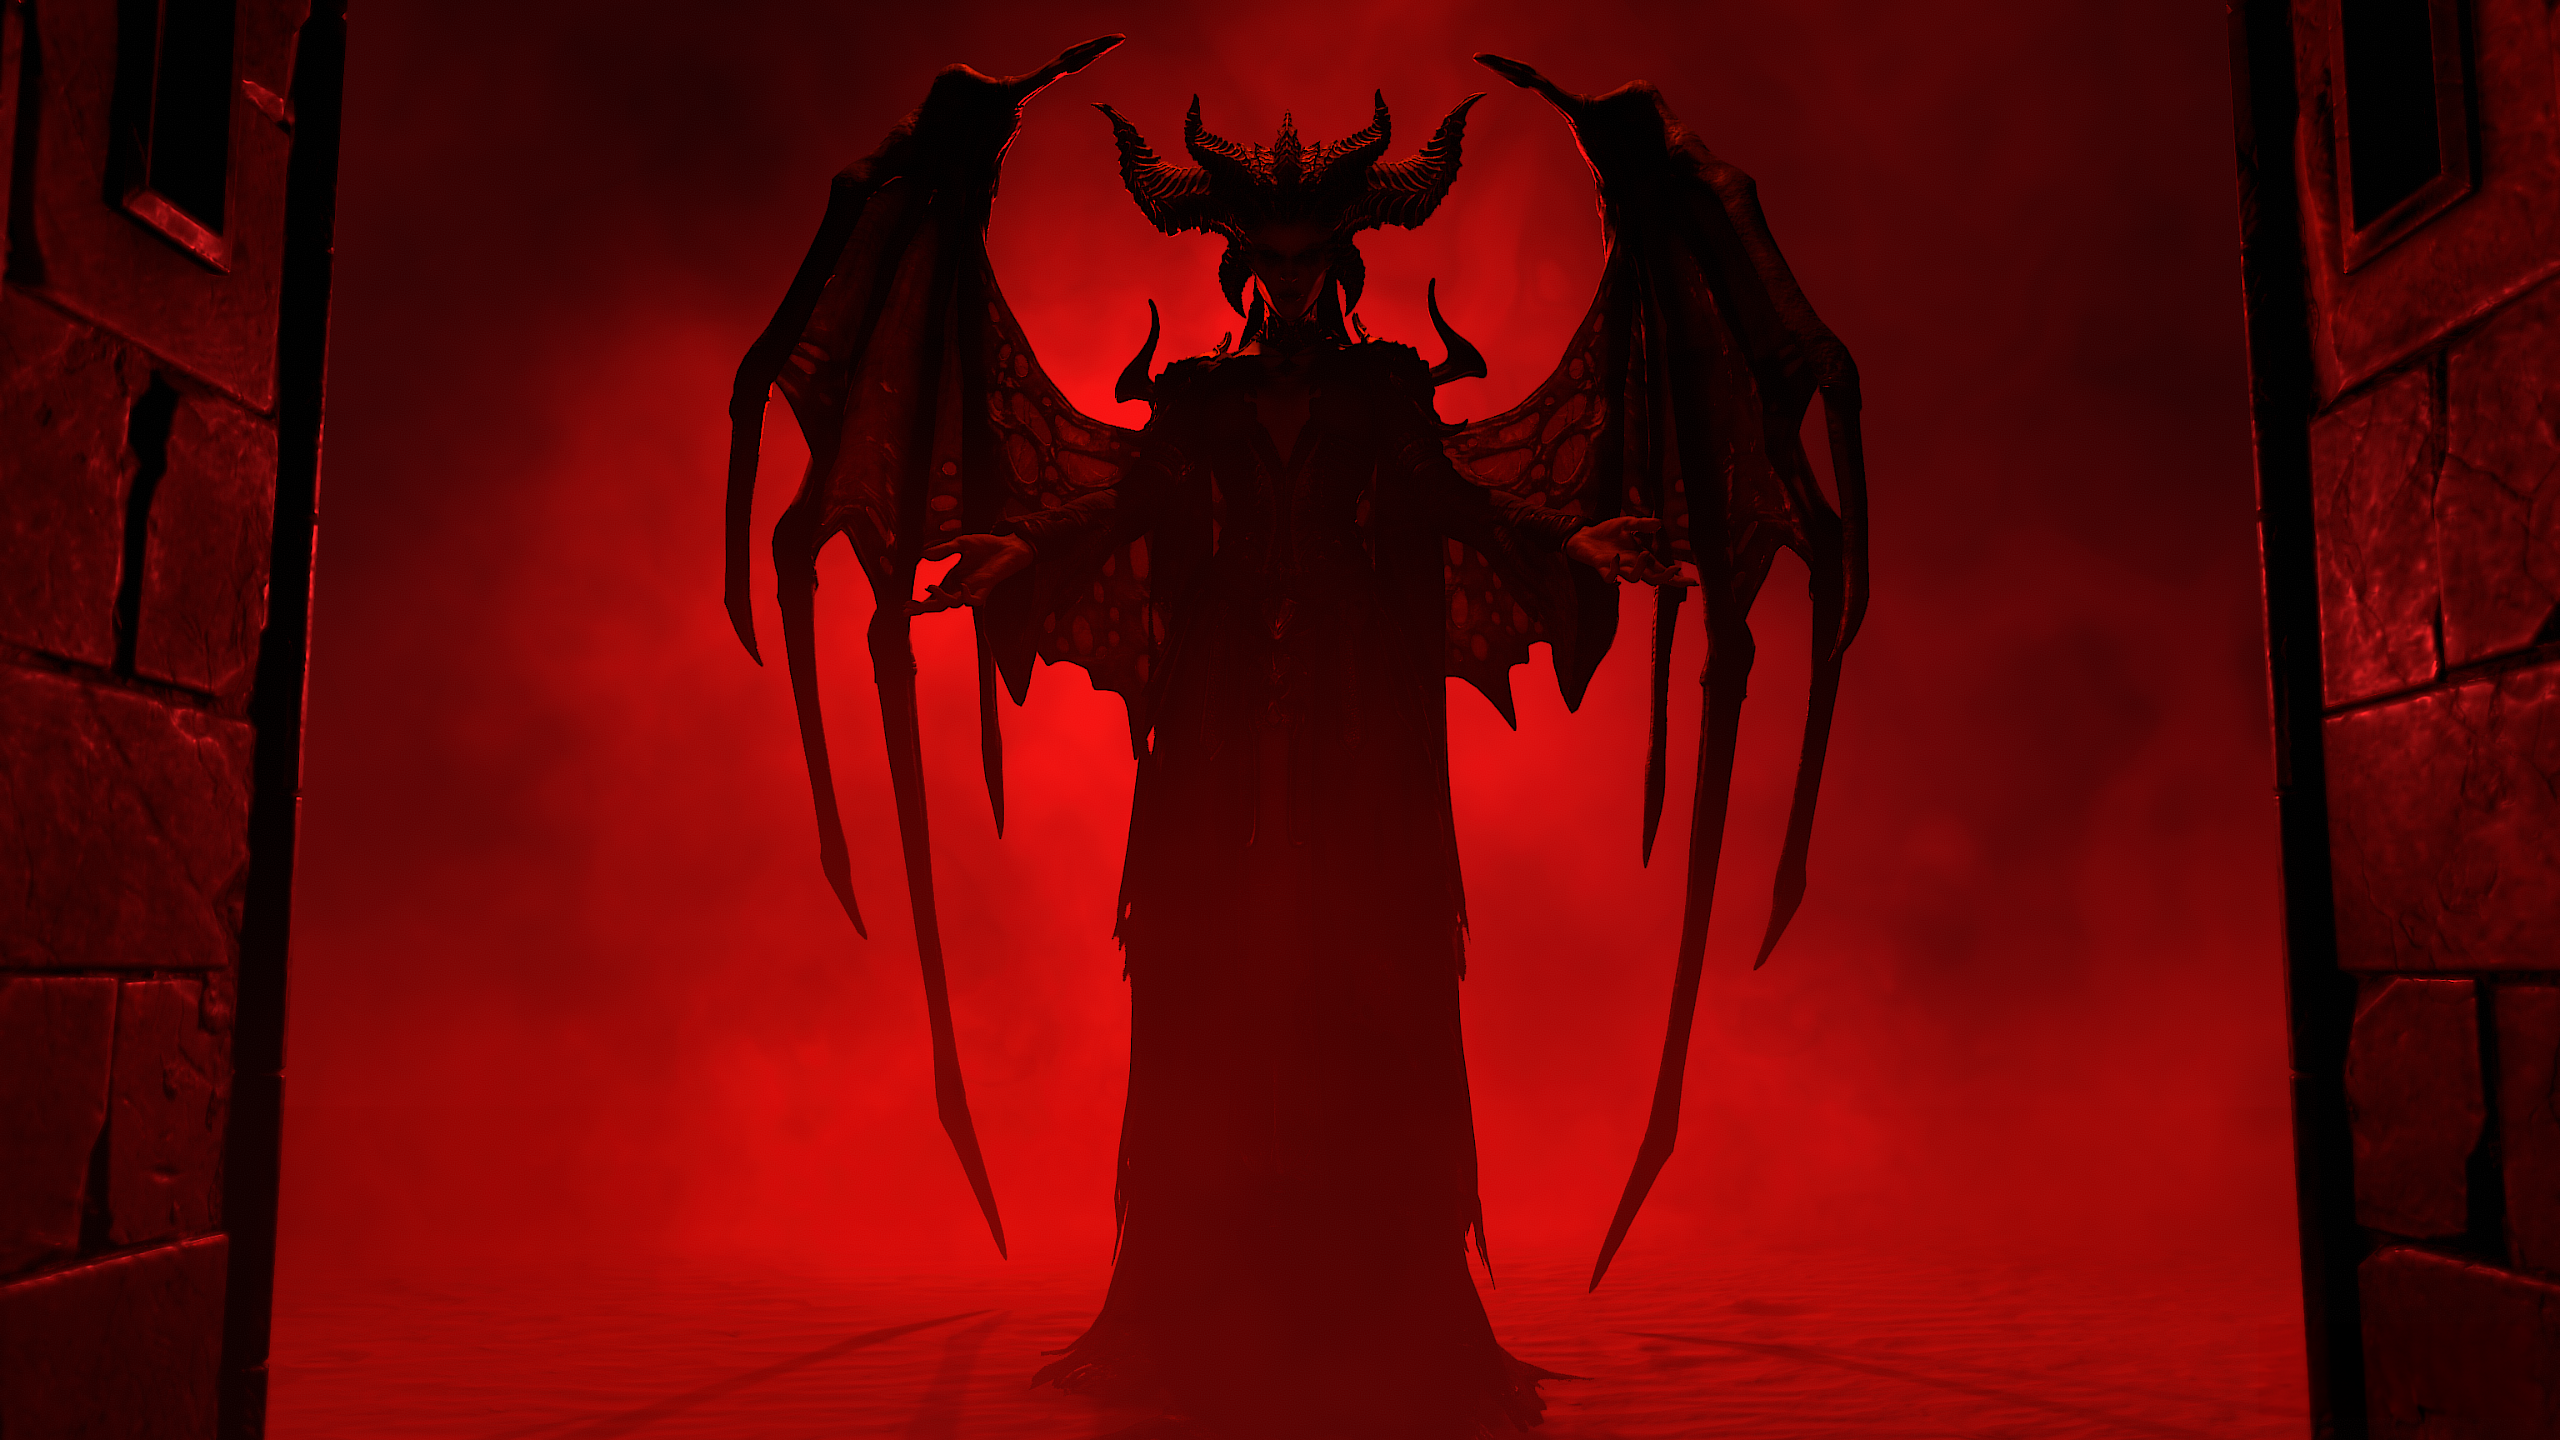 General 2560x1440 video games Diablo IV red background Diablo video game characters Lilith (Diablo) horns standing video game art wings digital art Blizzard Entertainment